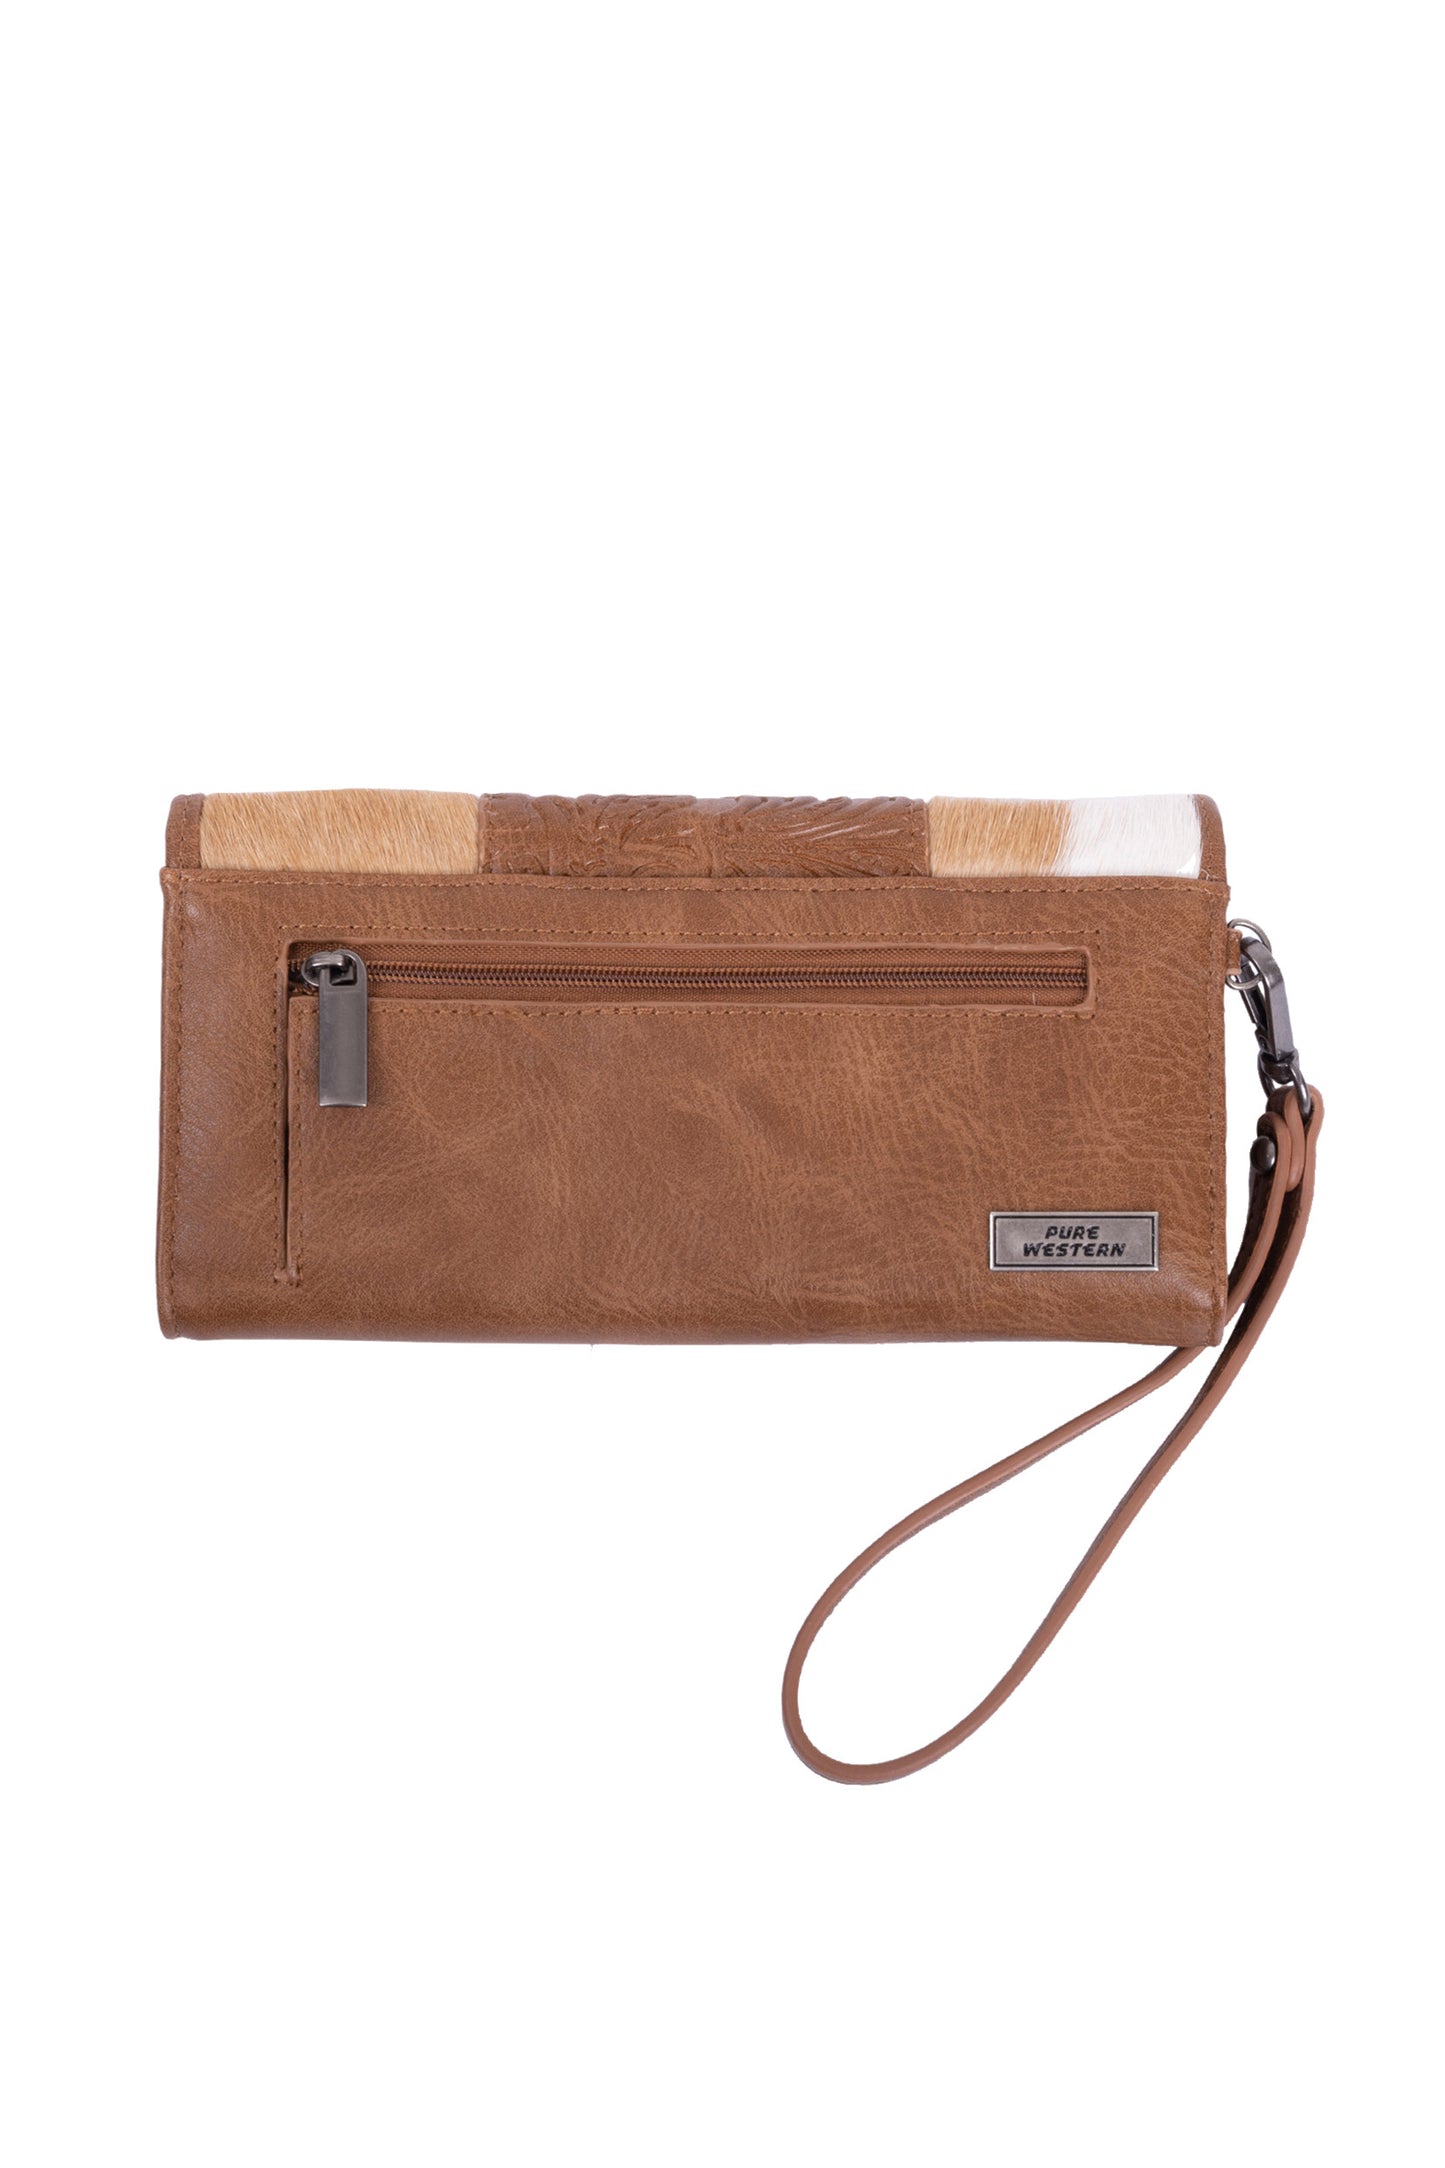 Pure Western Carly Wallet - Tan - P3S2921WLT